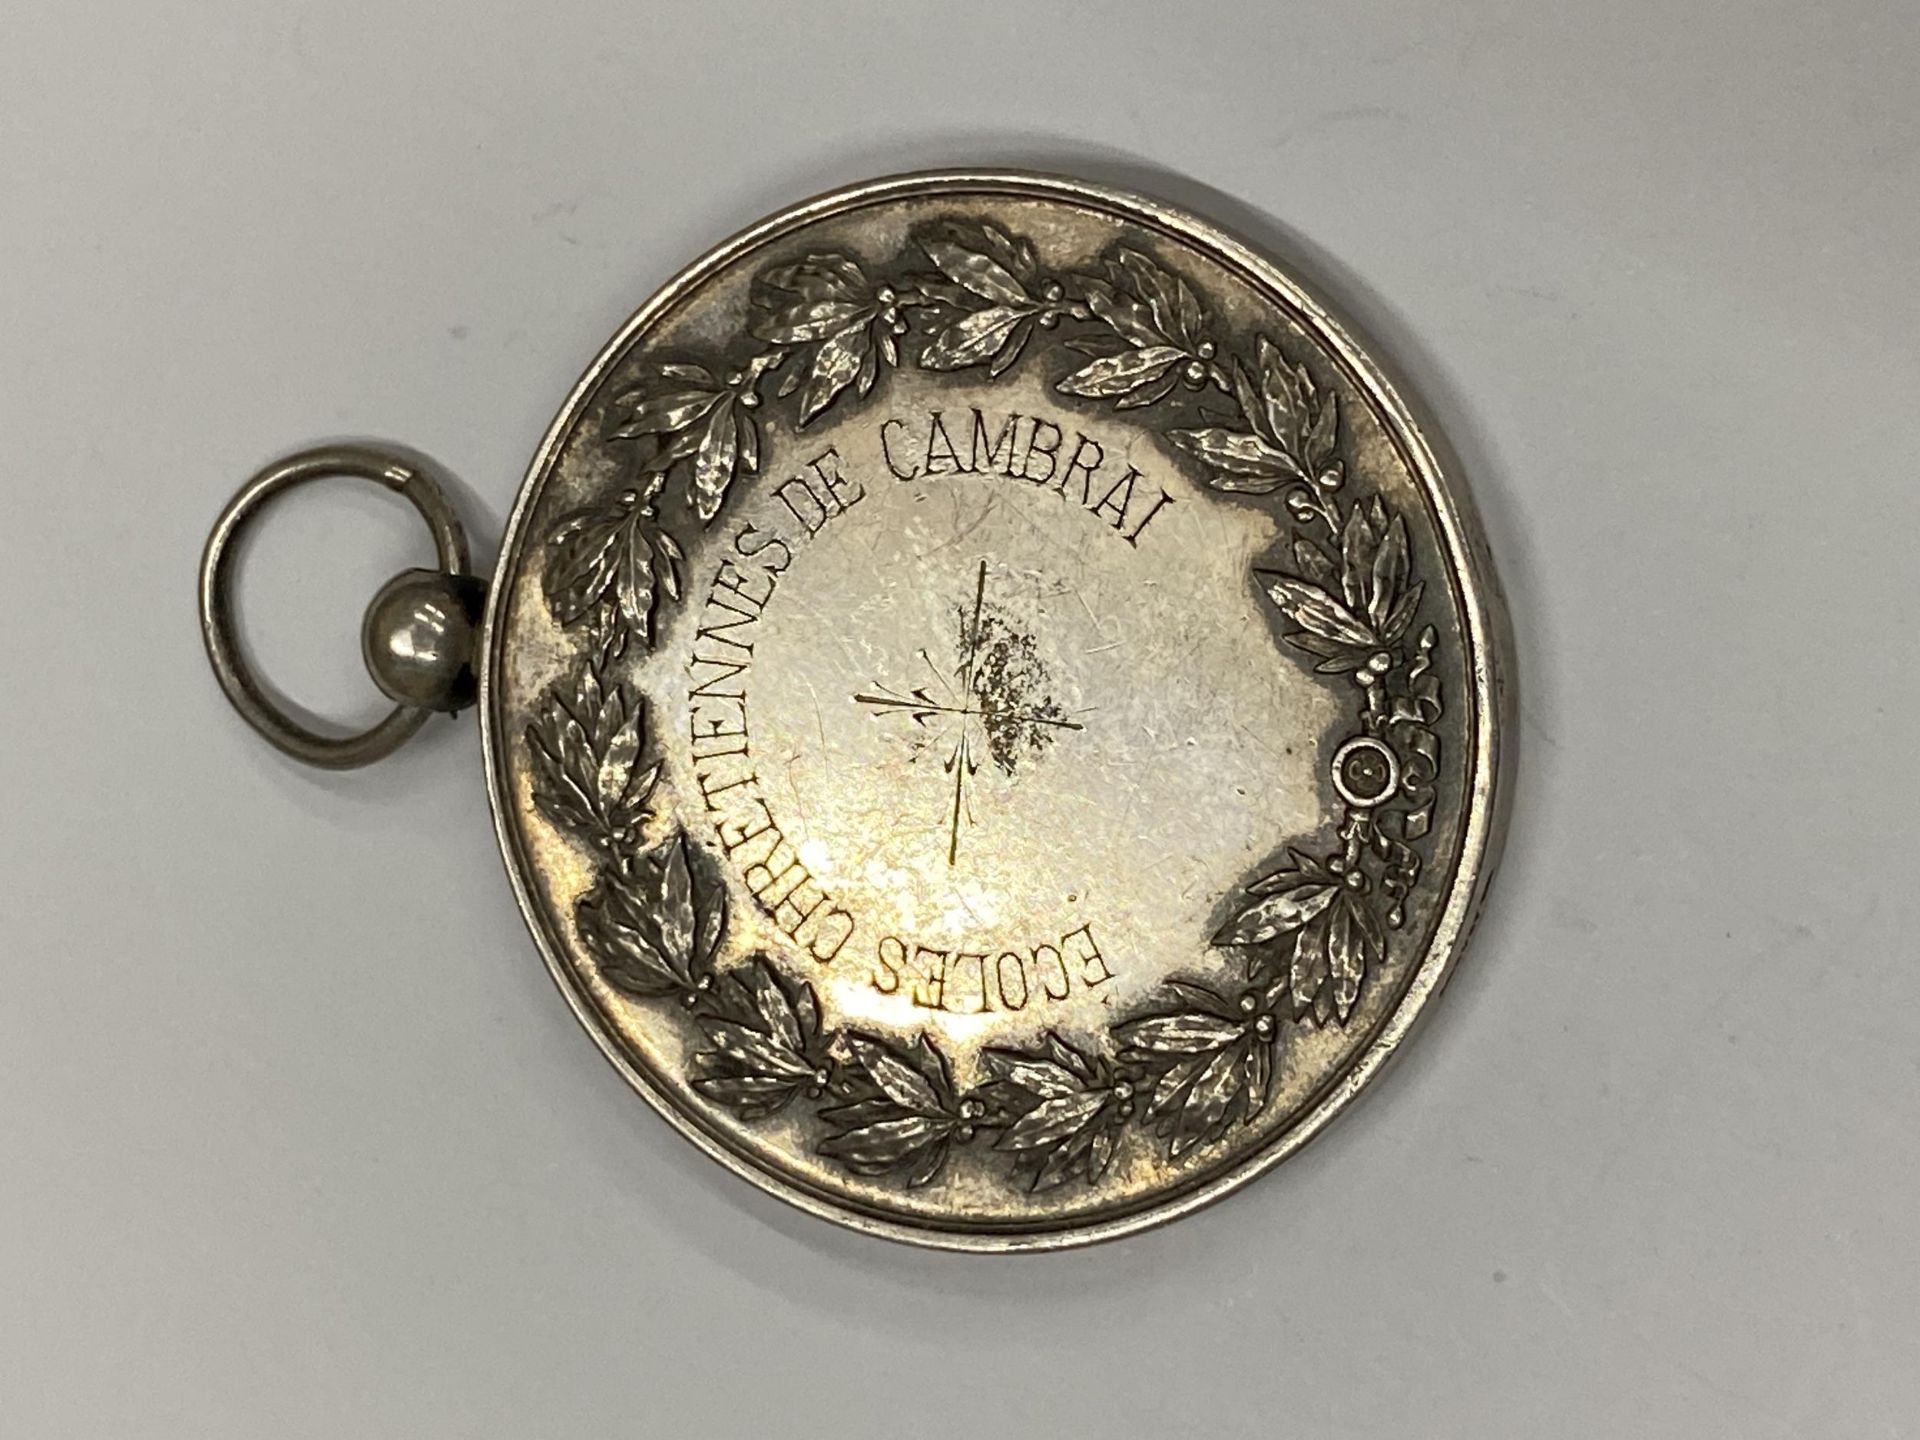 A 19TH CENTURY SILVER FRENCH 1ST PRIZE FOR DRAWING MEDAL FROM CAMBRAI CHRISTIAN SCHOOL, WEIGHT 52G - Image 3 of 3